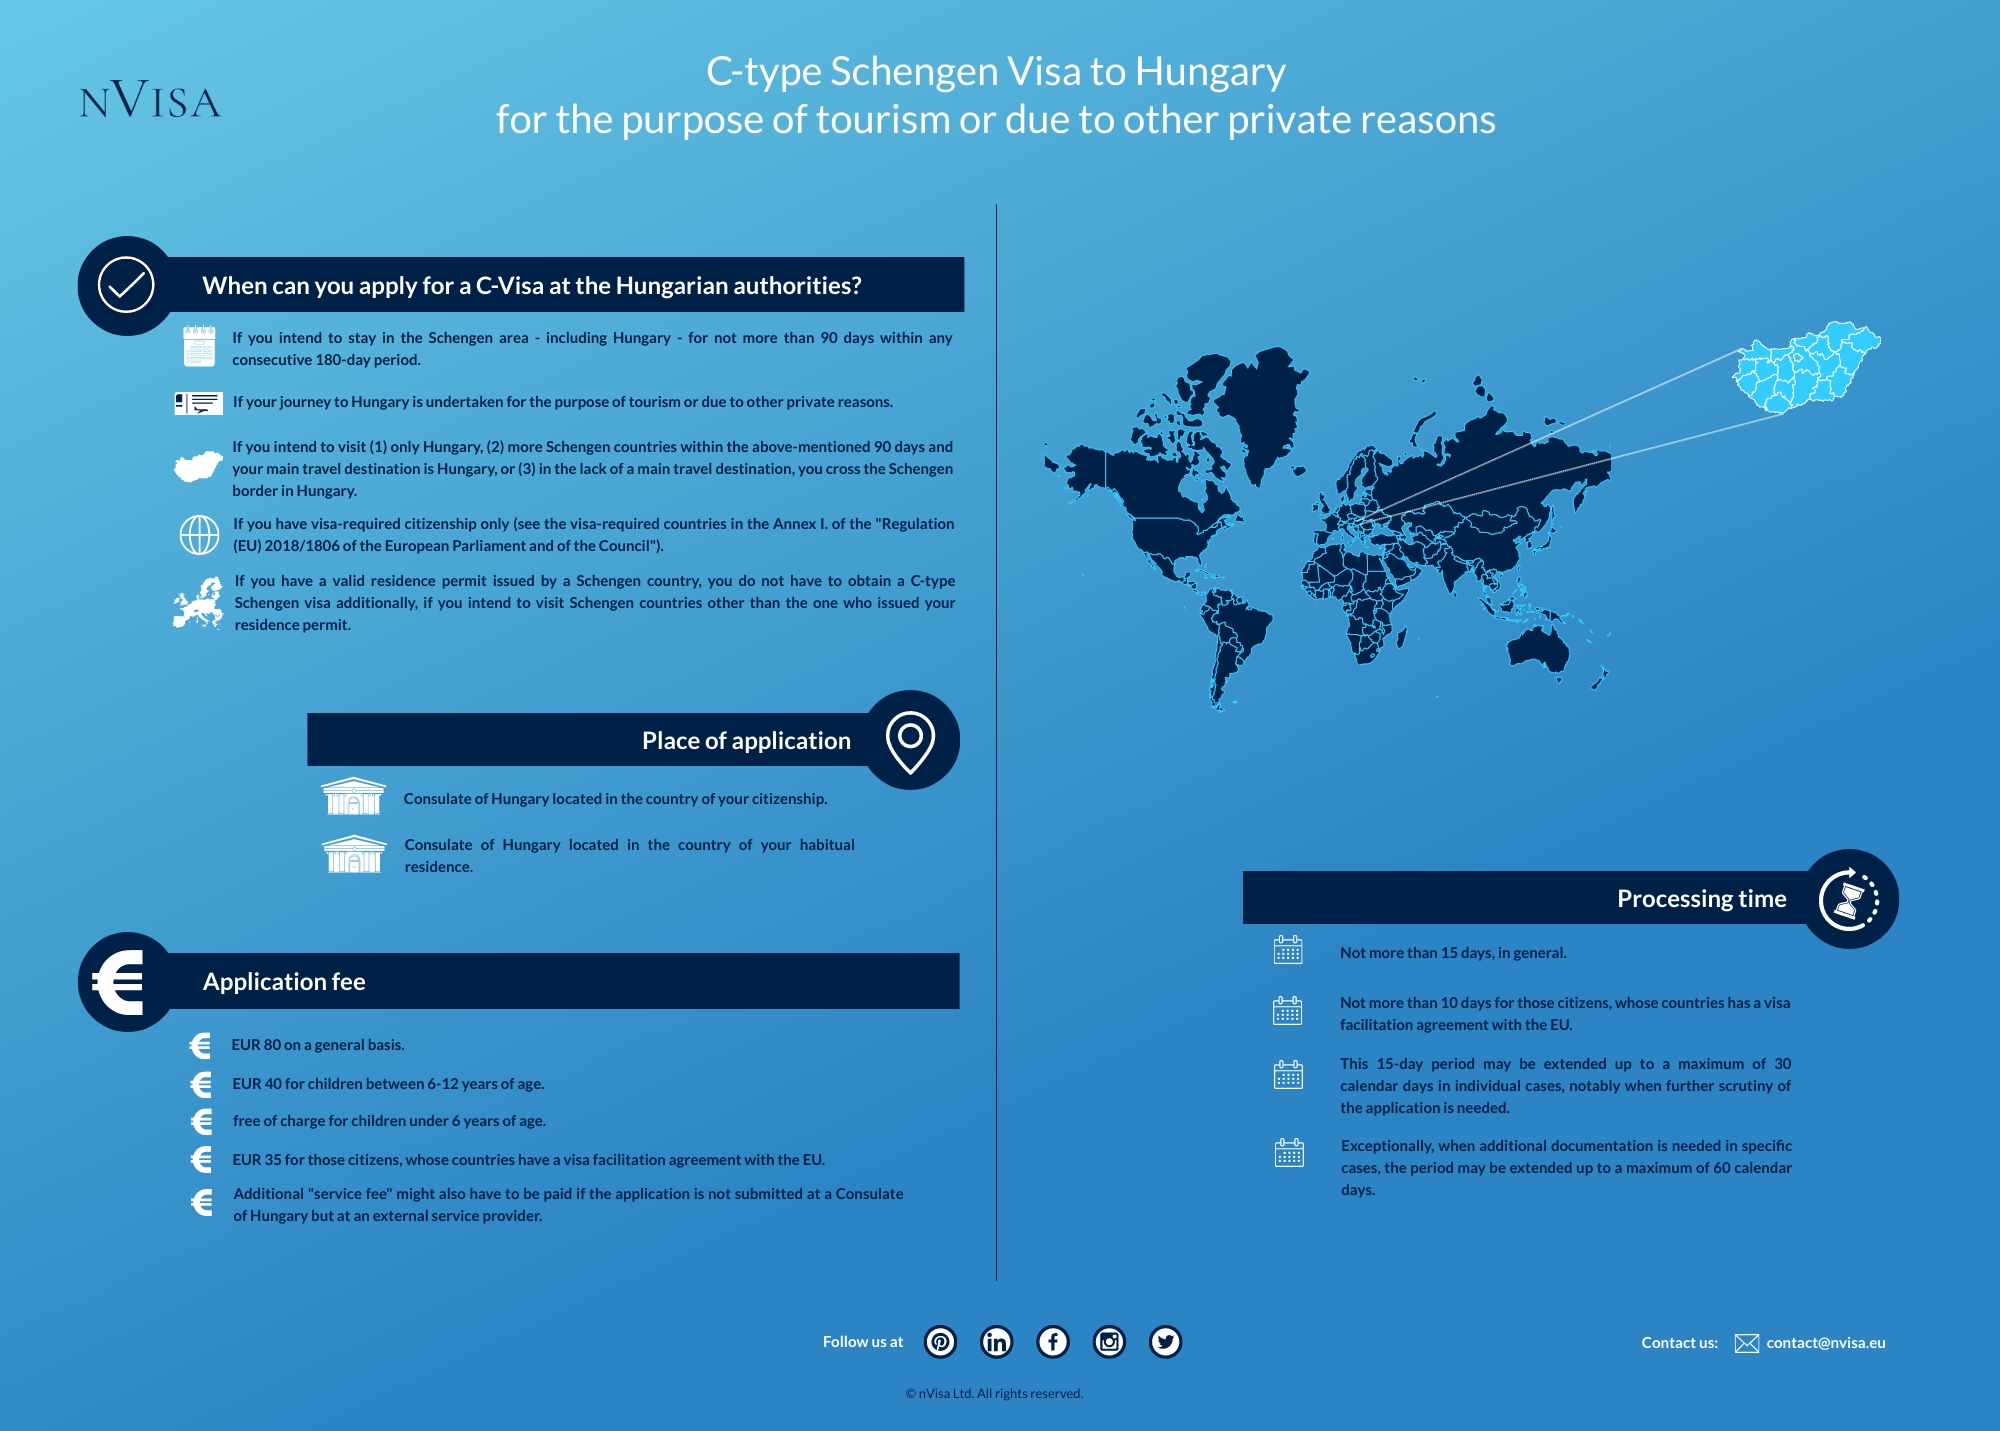 Infographic about immigration requirements and the details of obtaining a C-type Schengen Visa for the purpose of tourism or due to other private reasons in Hungary.